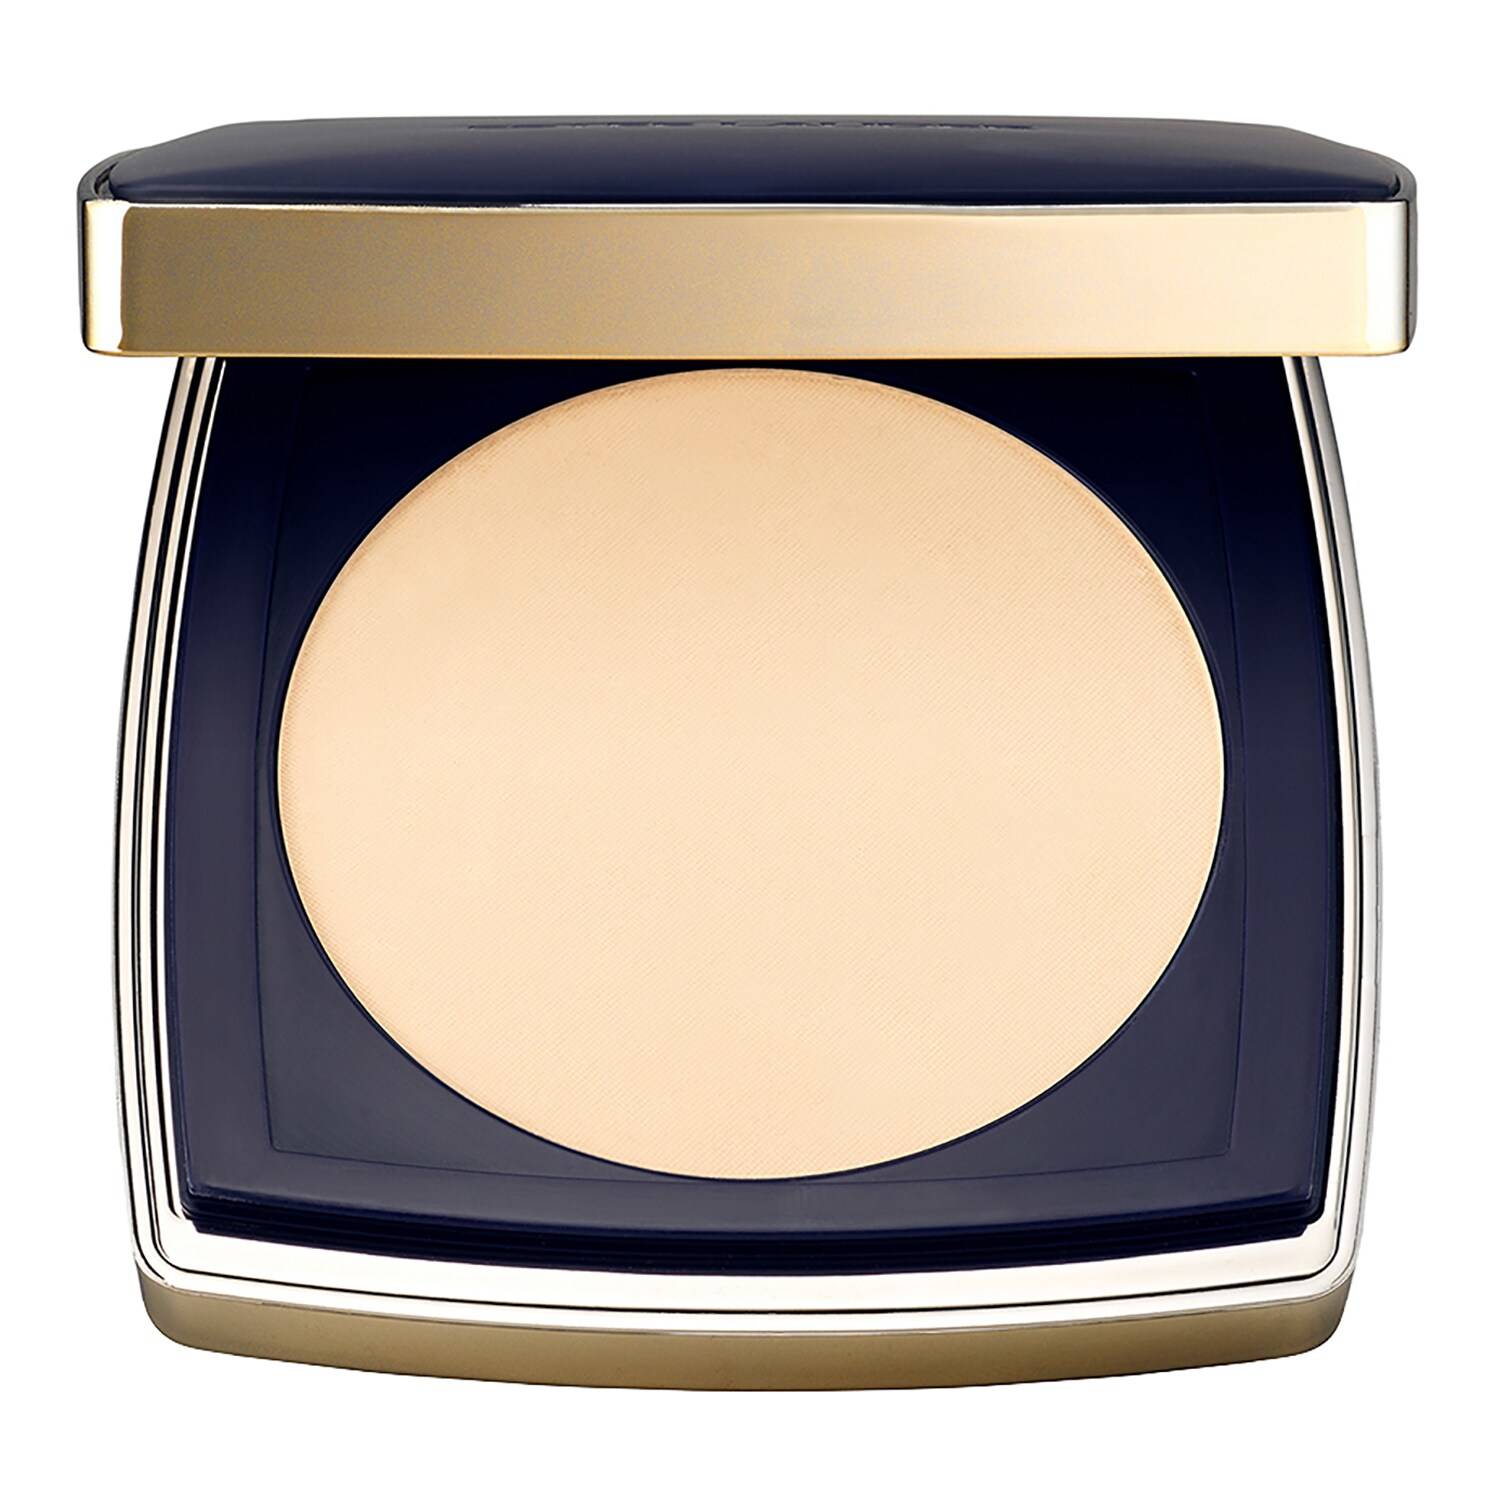 Estee Lauder Double Wear Stay-In-Place Matte Powder Foundation Spf10 12G 1N1 Ivory Nude